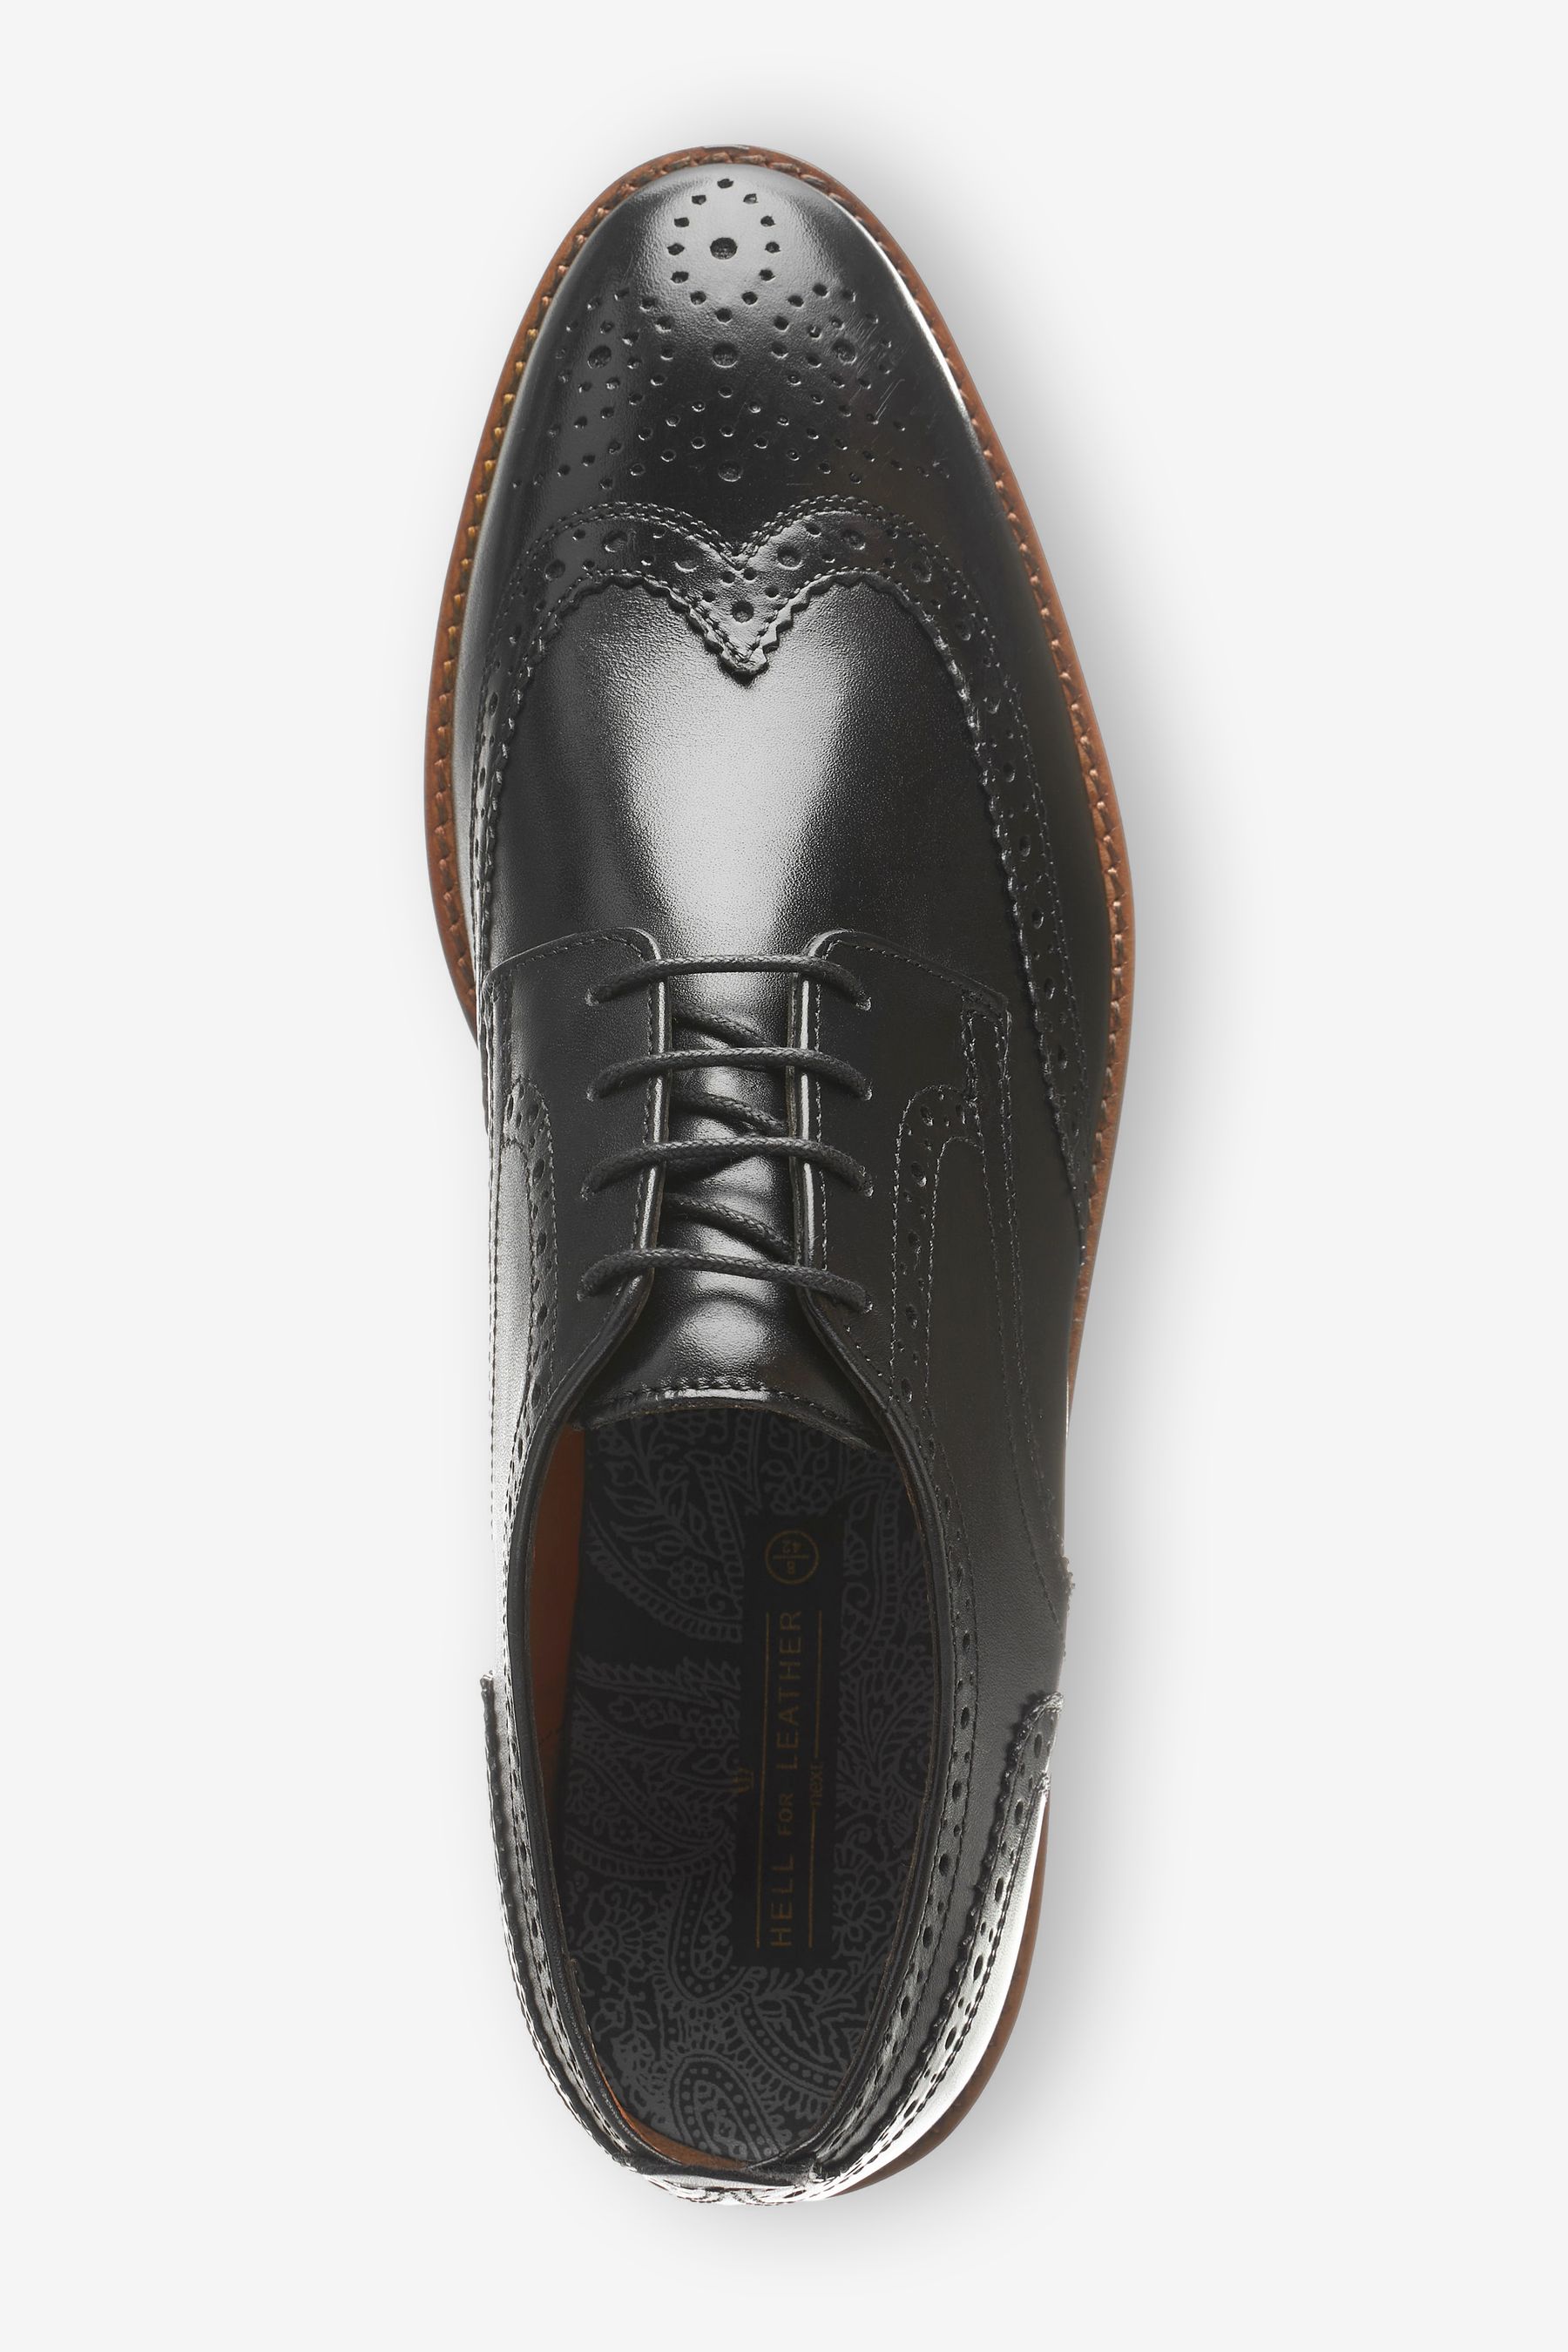 Mens Contrast Sole Leather Brogues Wide Fit